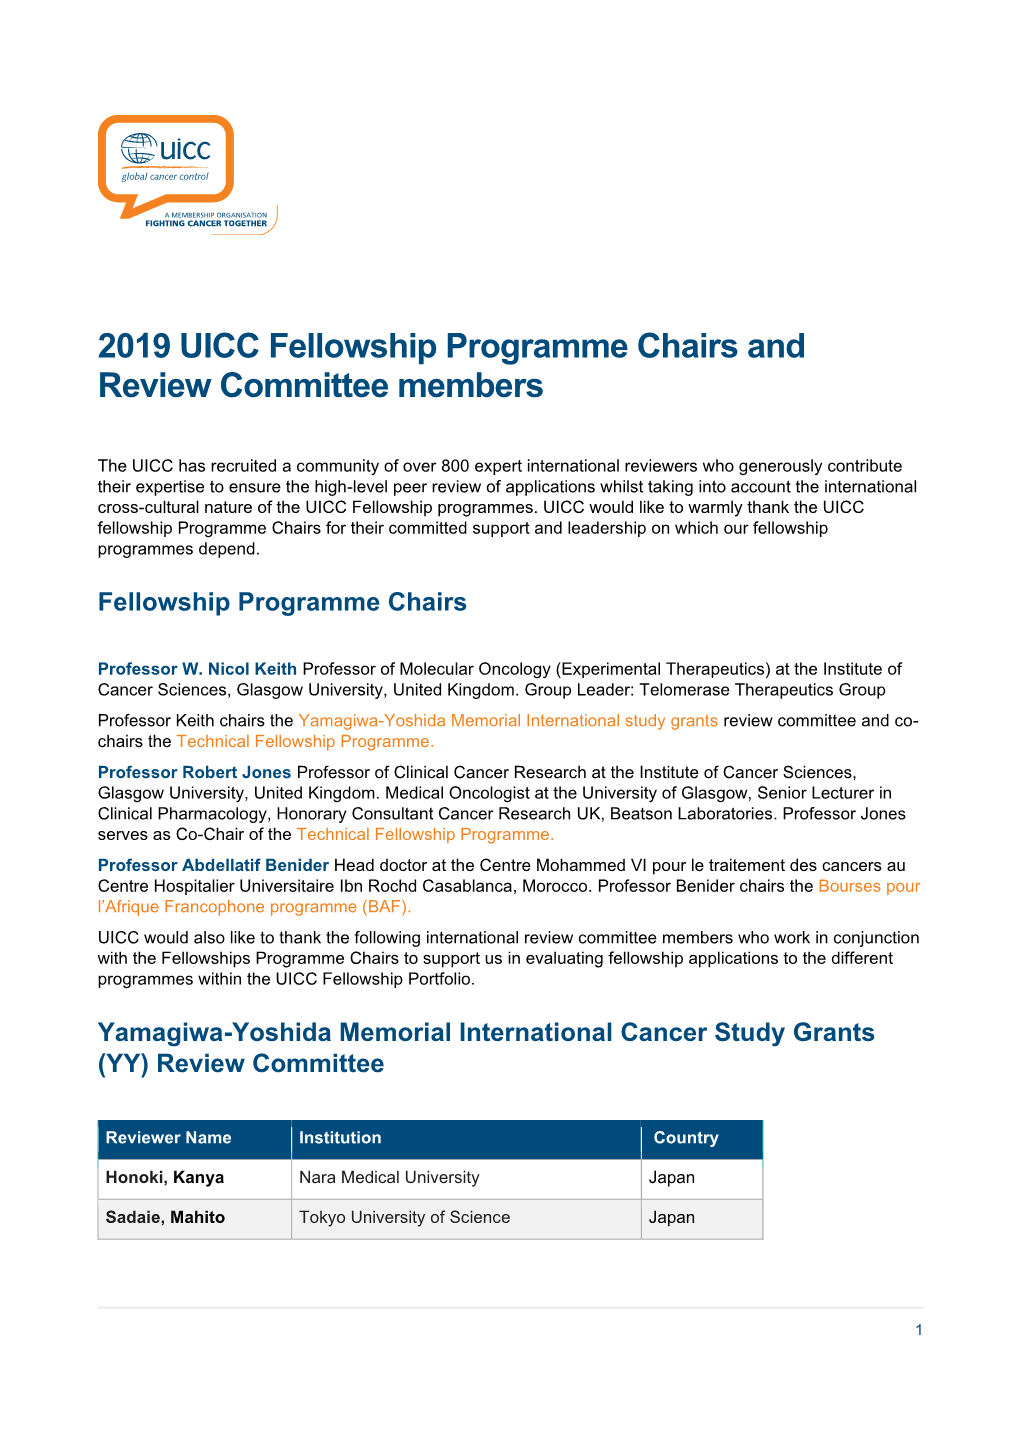 2019 UICC Fellowship Programme Chairs and Review Committee Members